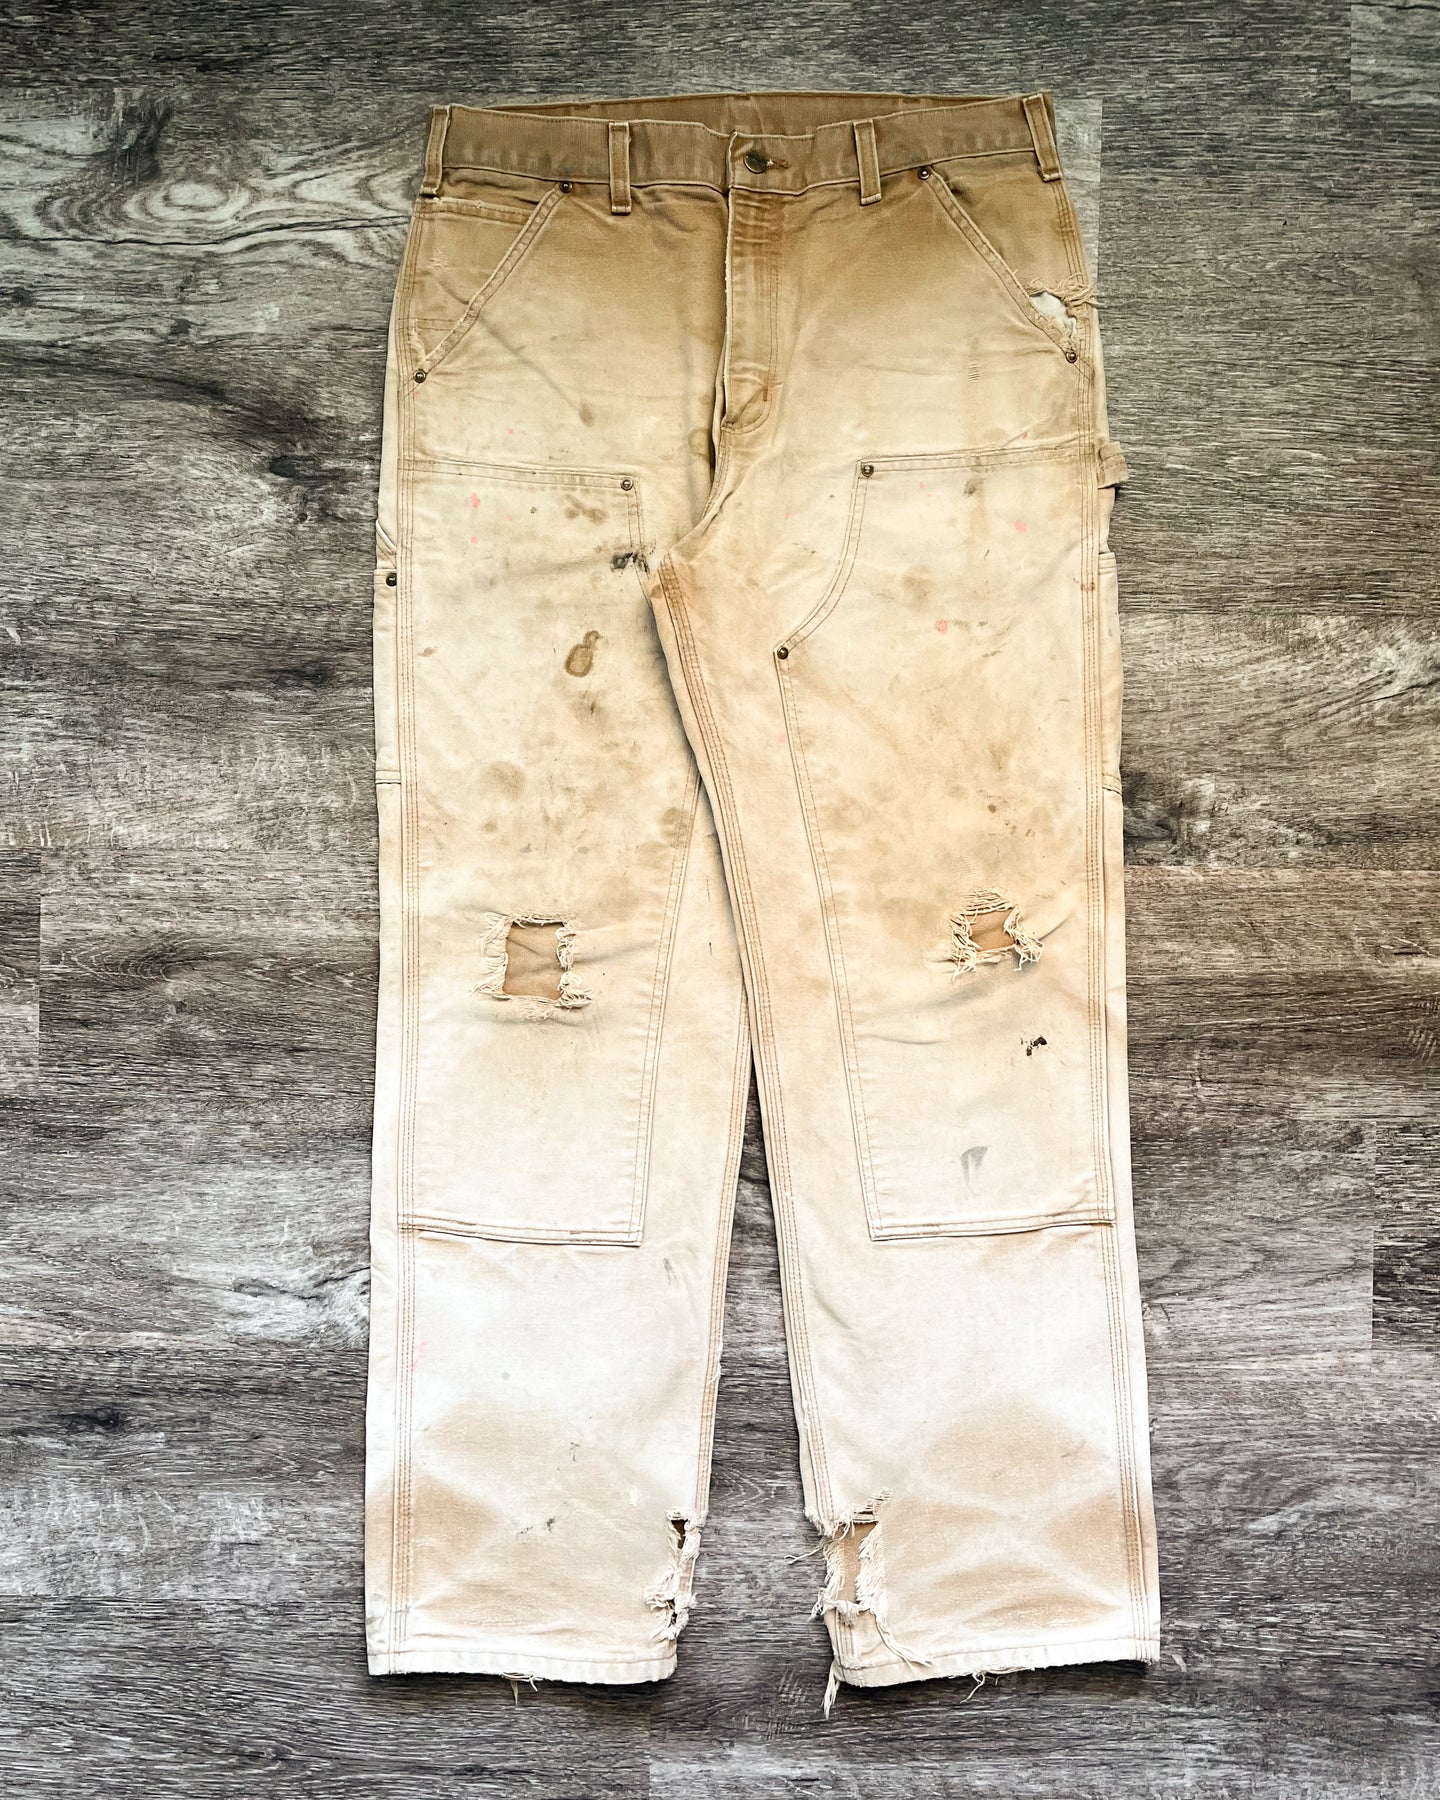 Carhartt Thrashed Sun Bleached Double Knee Pants - Size 32 x 32